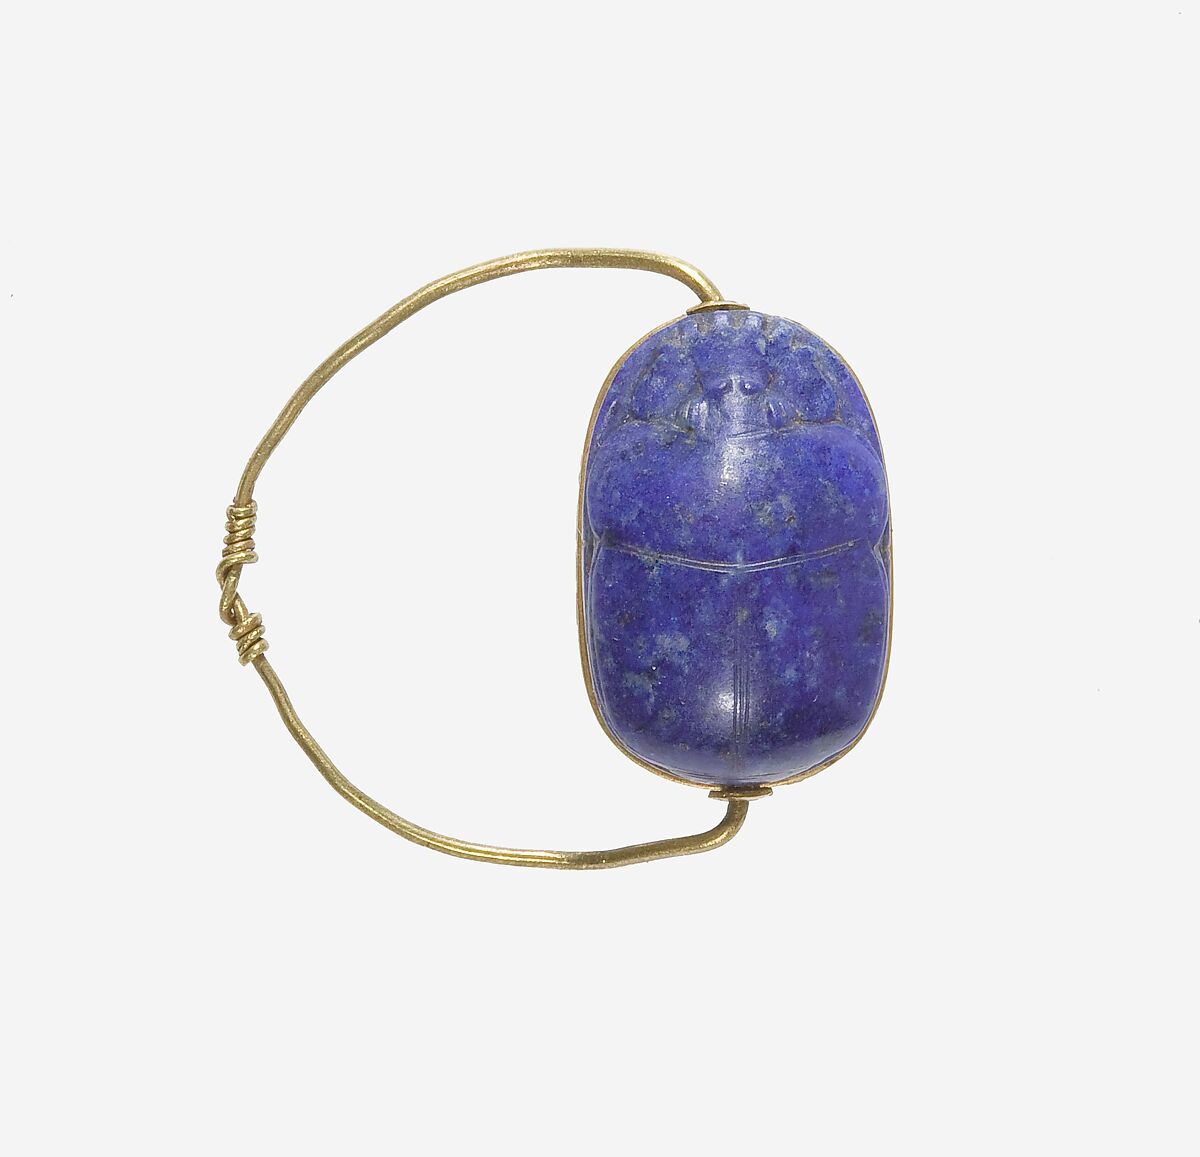 Scarab Finger Ring, Lapis lazuli scarab set in gold plate and on a gold wire ring
Lapis-lazuli 